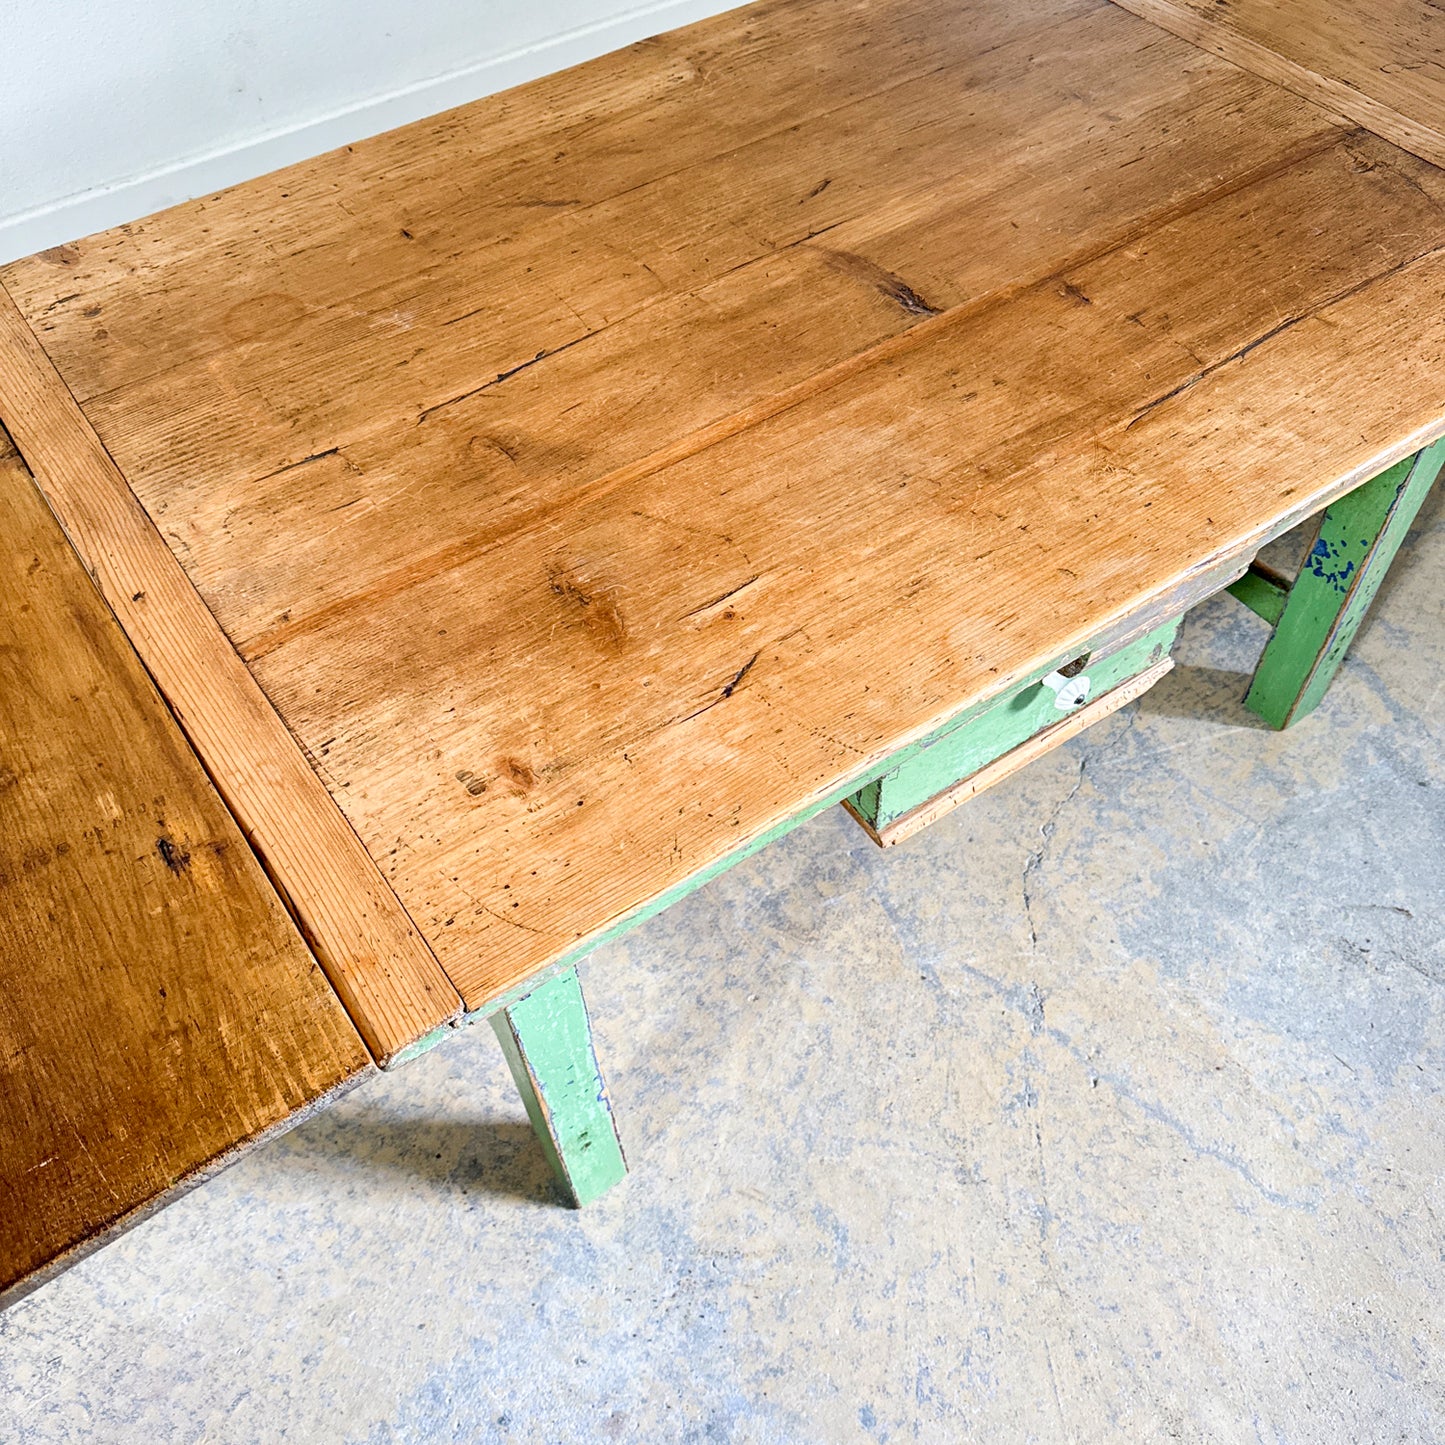 Antique Pine Drawleaf Table Cut to Coffee Table